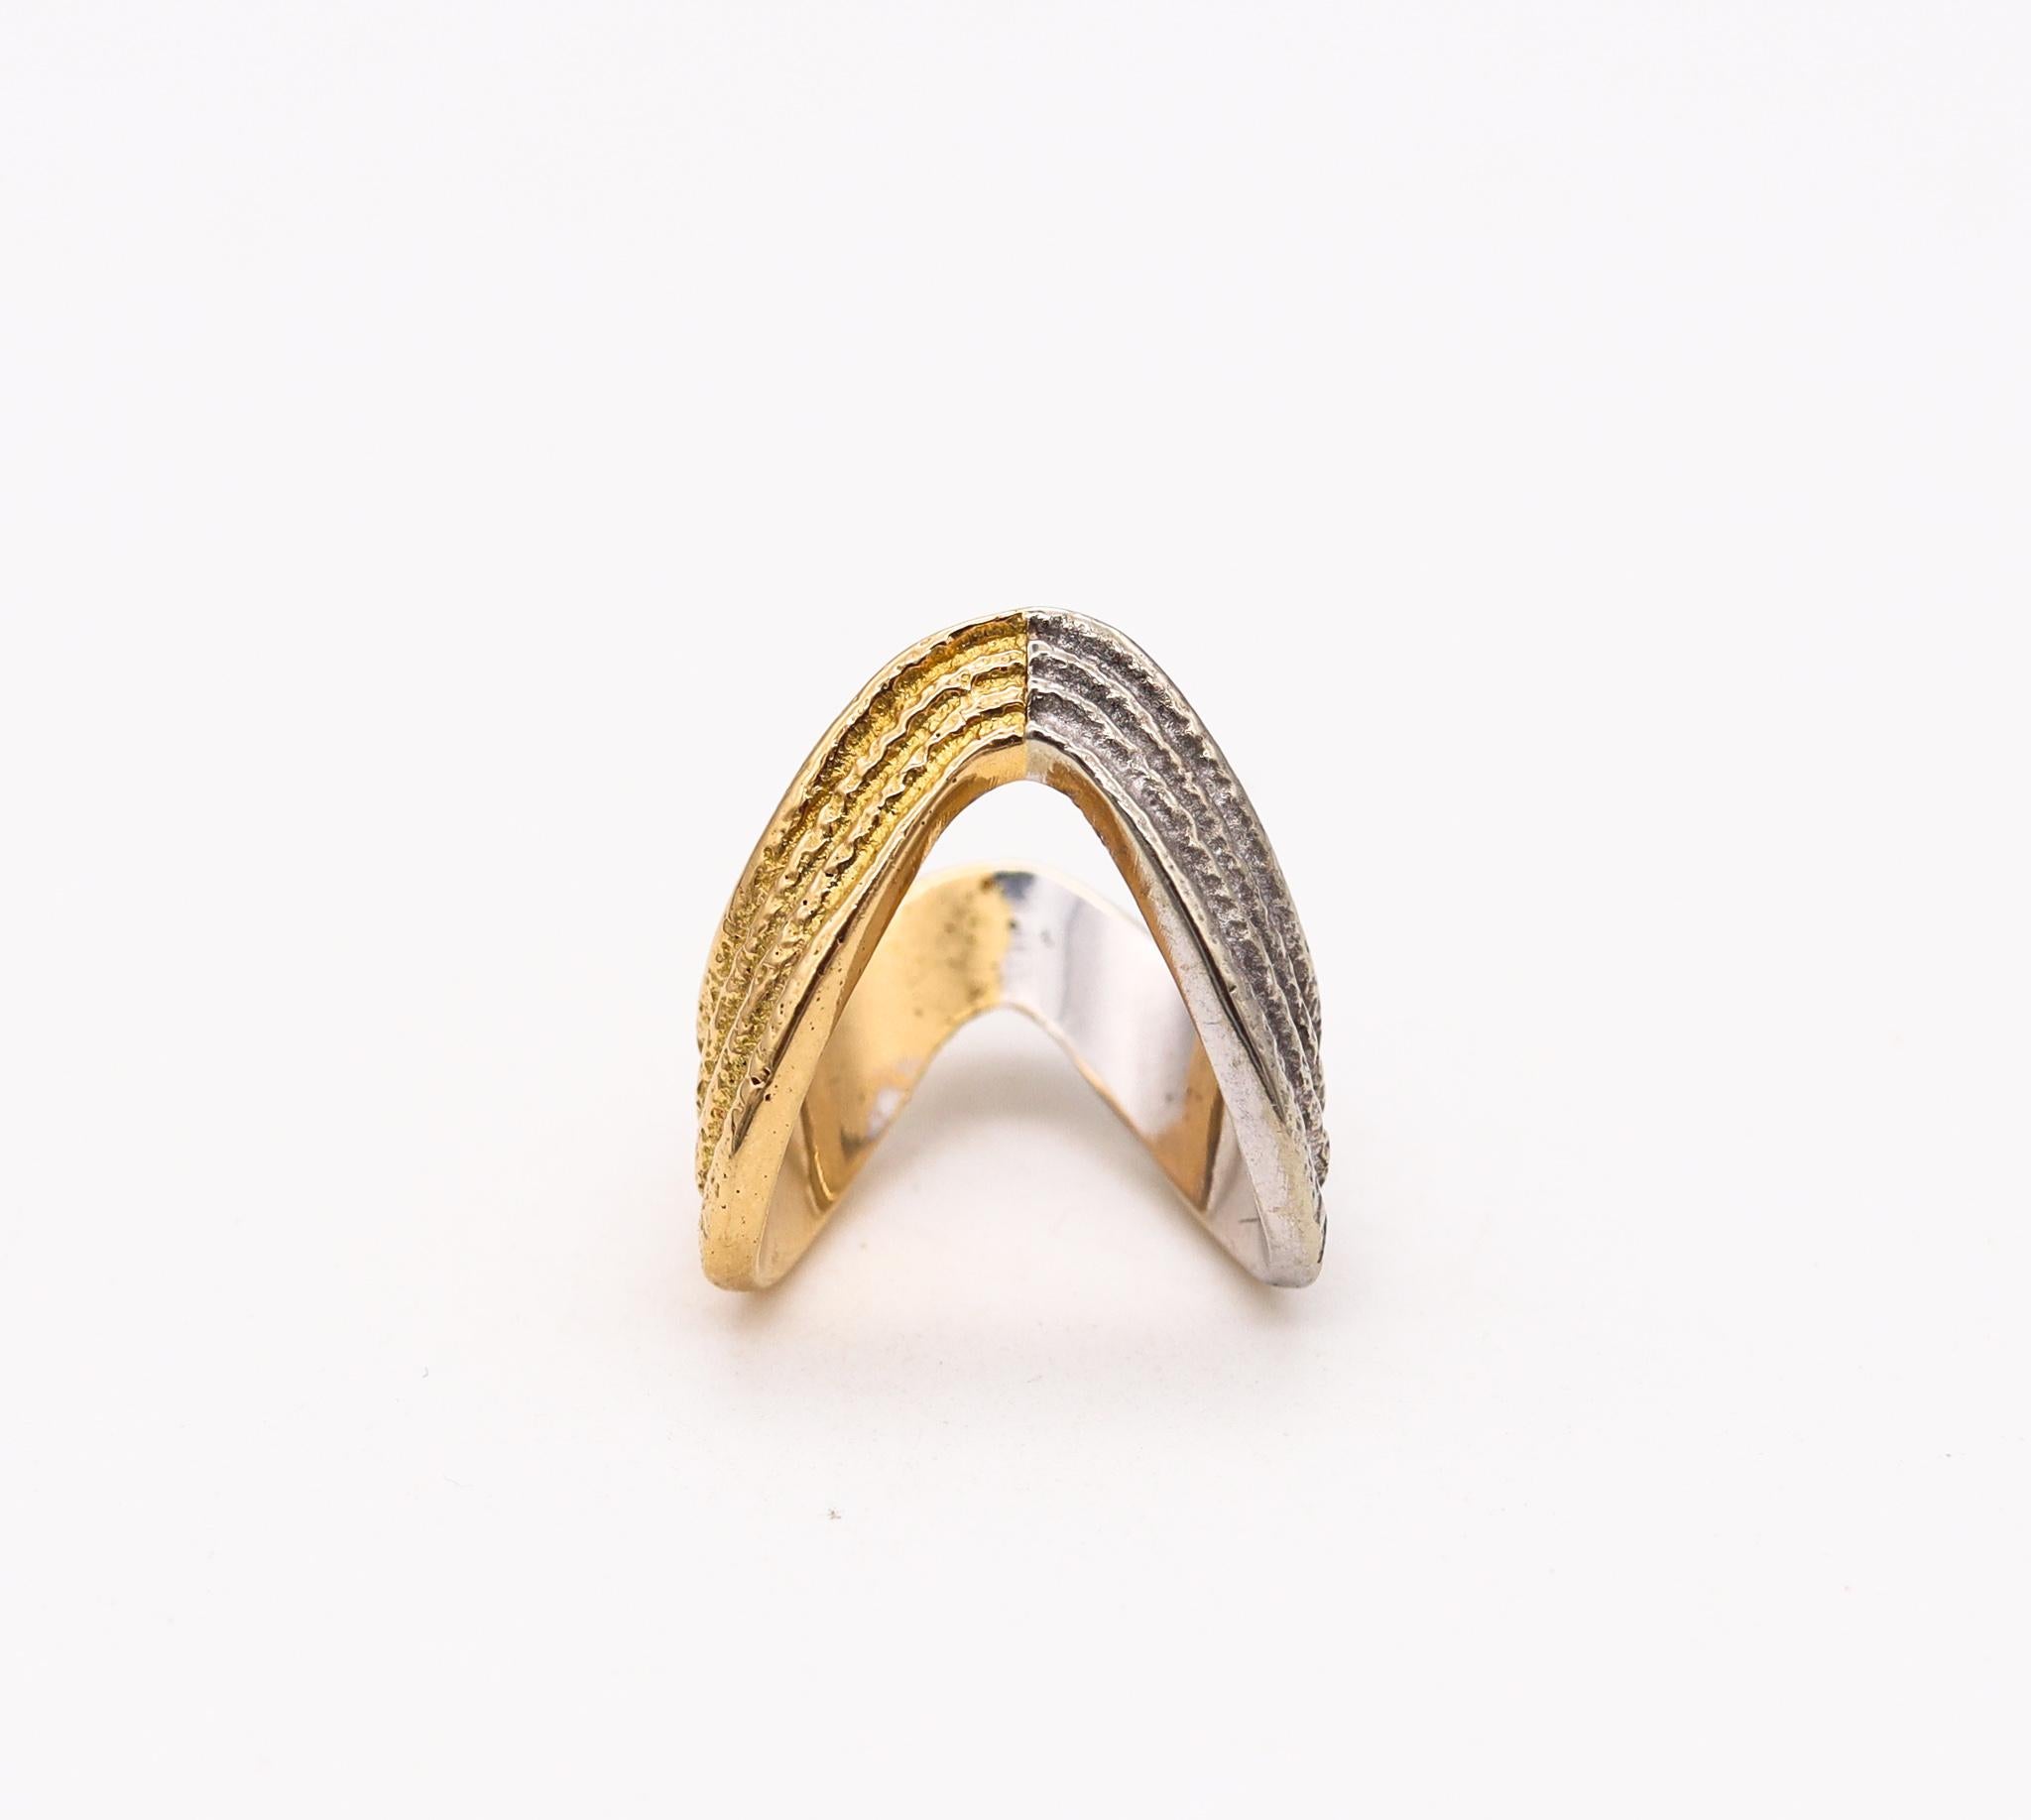 Bvlgari 1970 Roma Rare Geometric Textured Ring In Two Tones Of 18Kt Gold 1